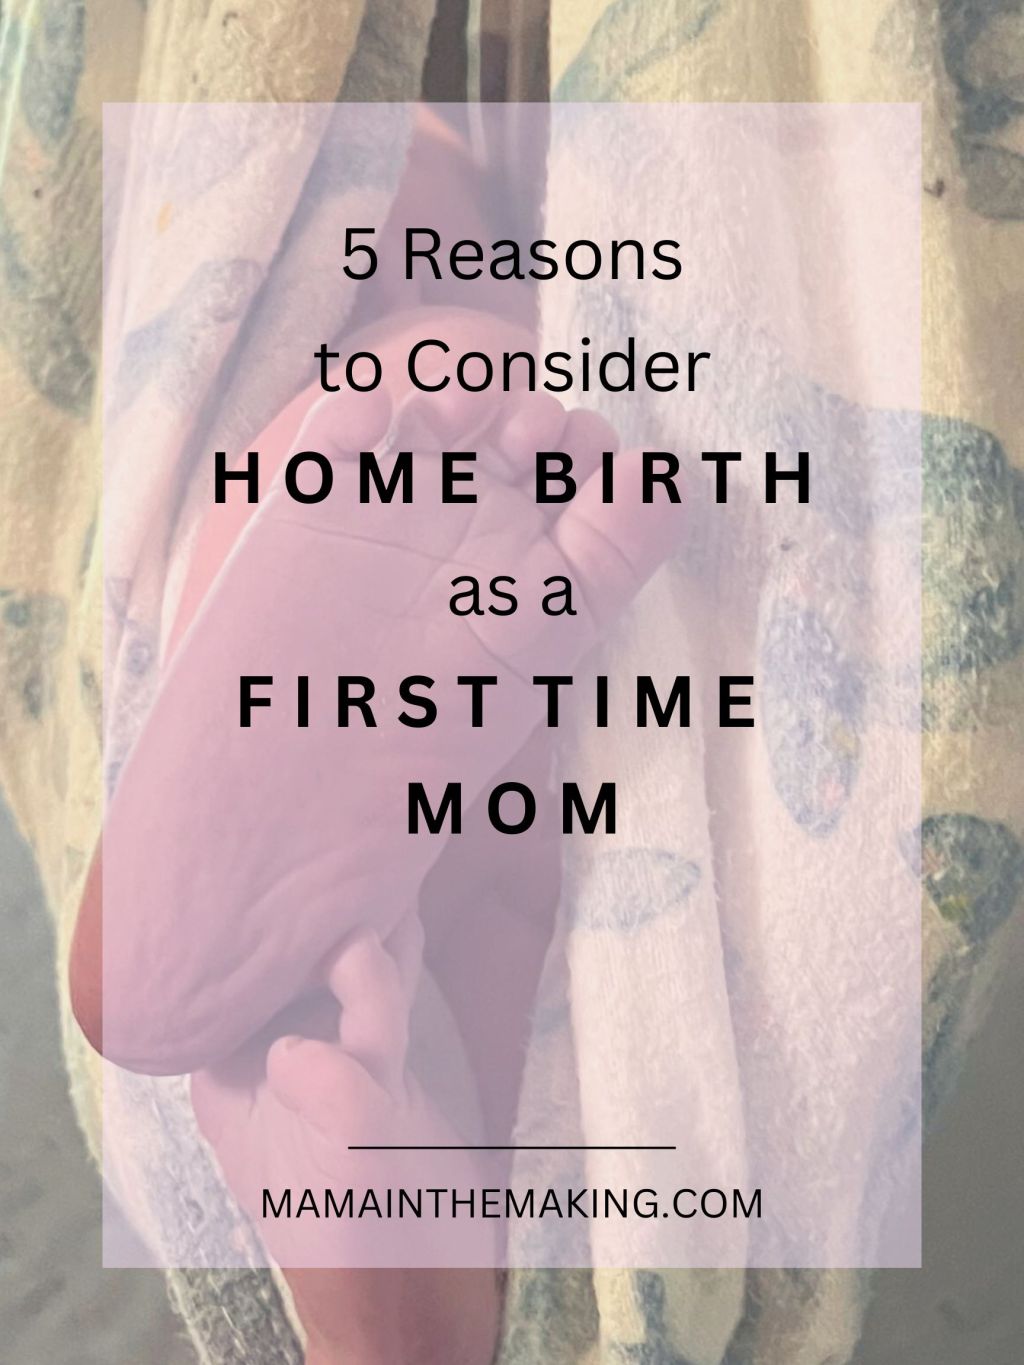 Five Reasons to Consider a Home Birth as a First-Time Mom